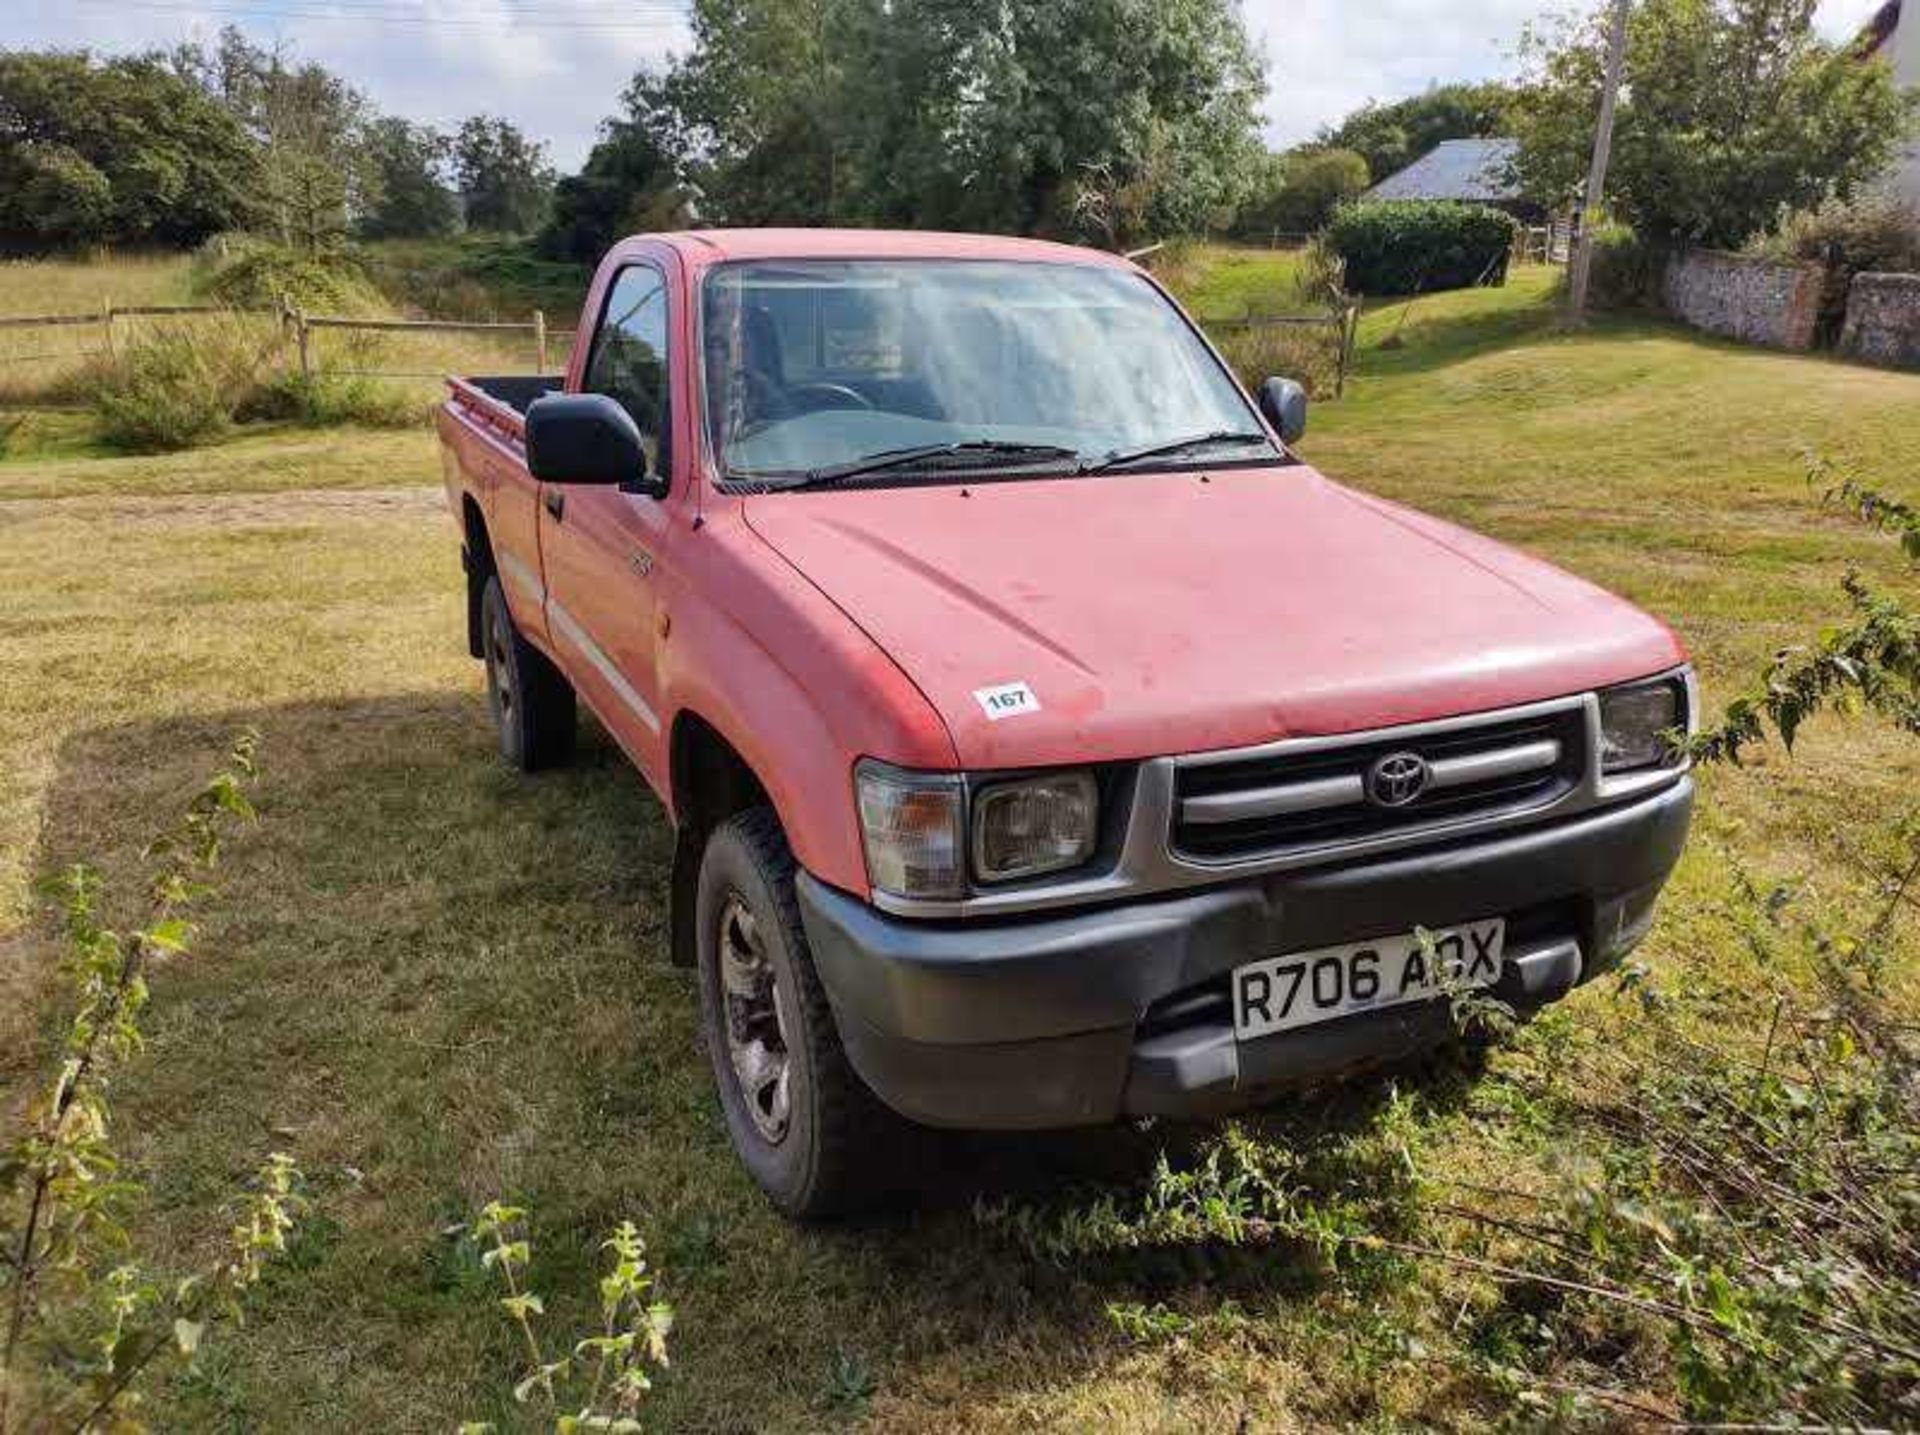 Toyota Hilux 2.4TD 4WD Pickup with 131,180 Miles (Reg. No. R706 ADX) MOT Valid Until 07/12/ - Image 4 of 4